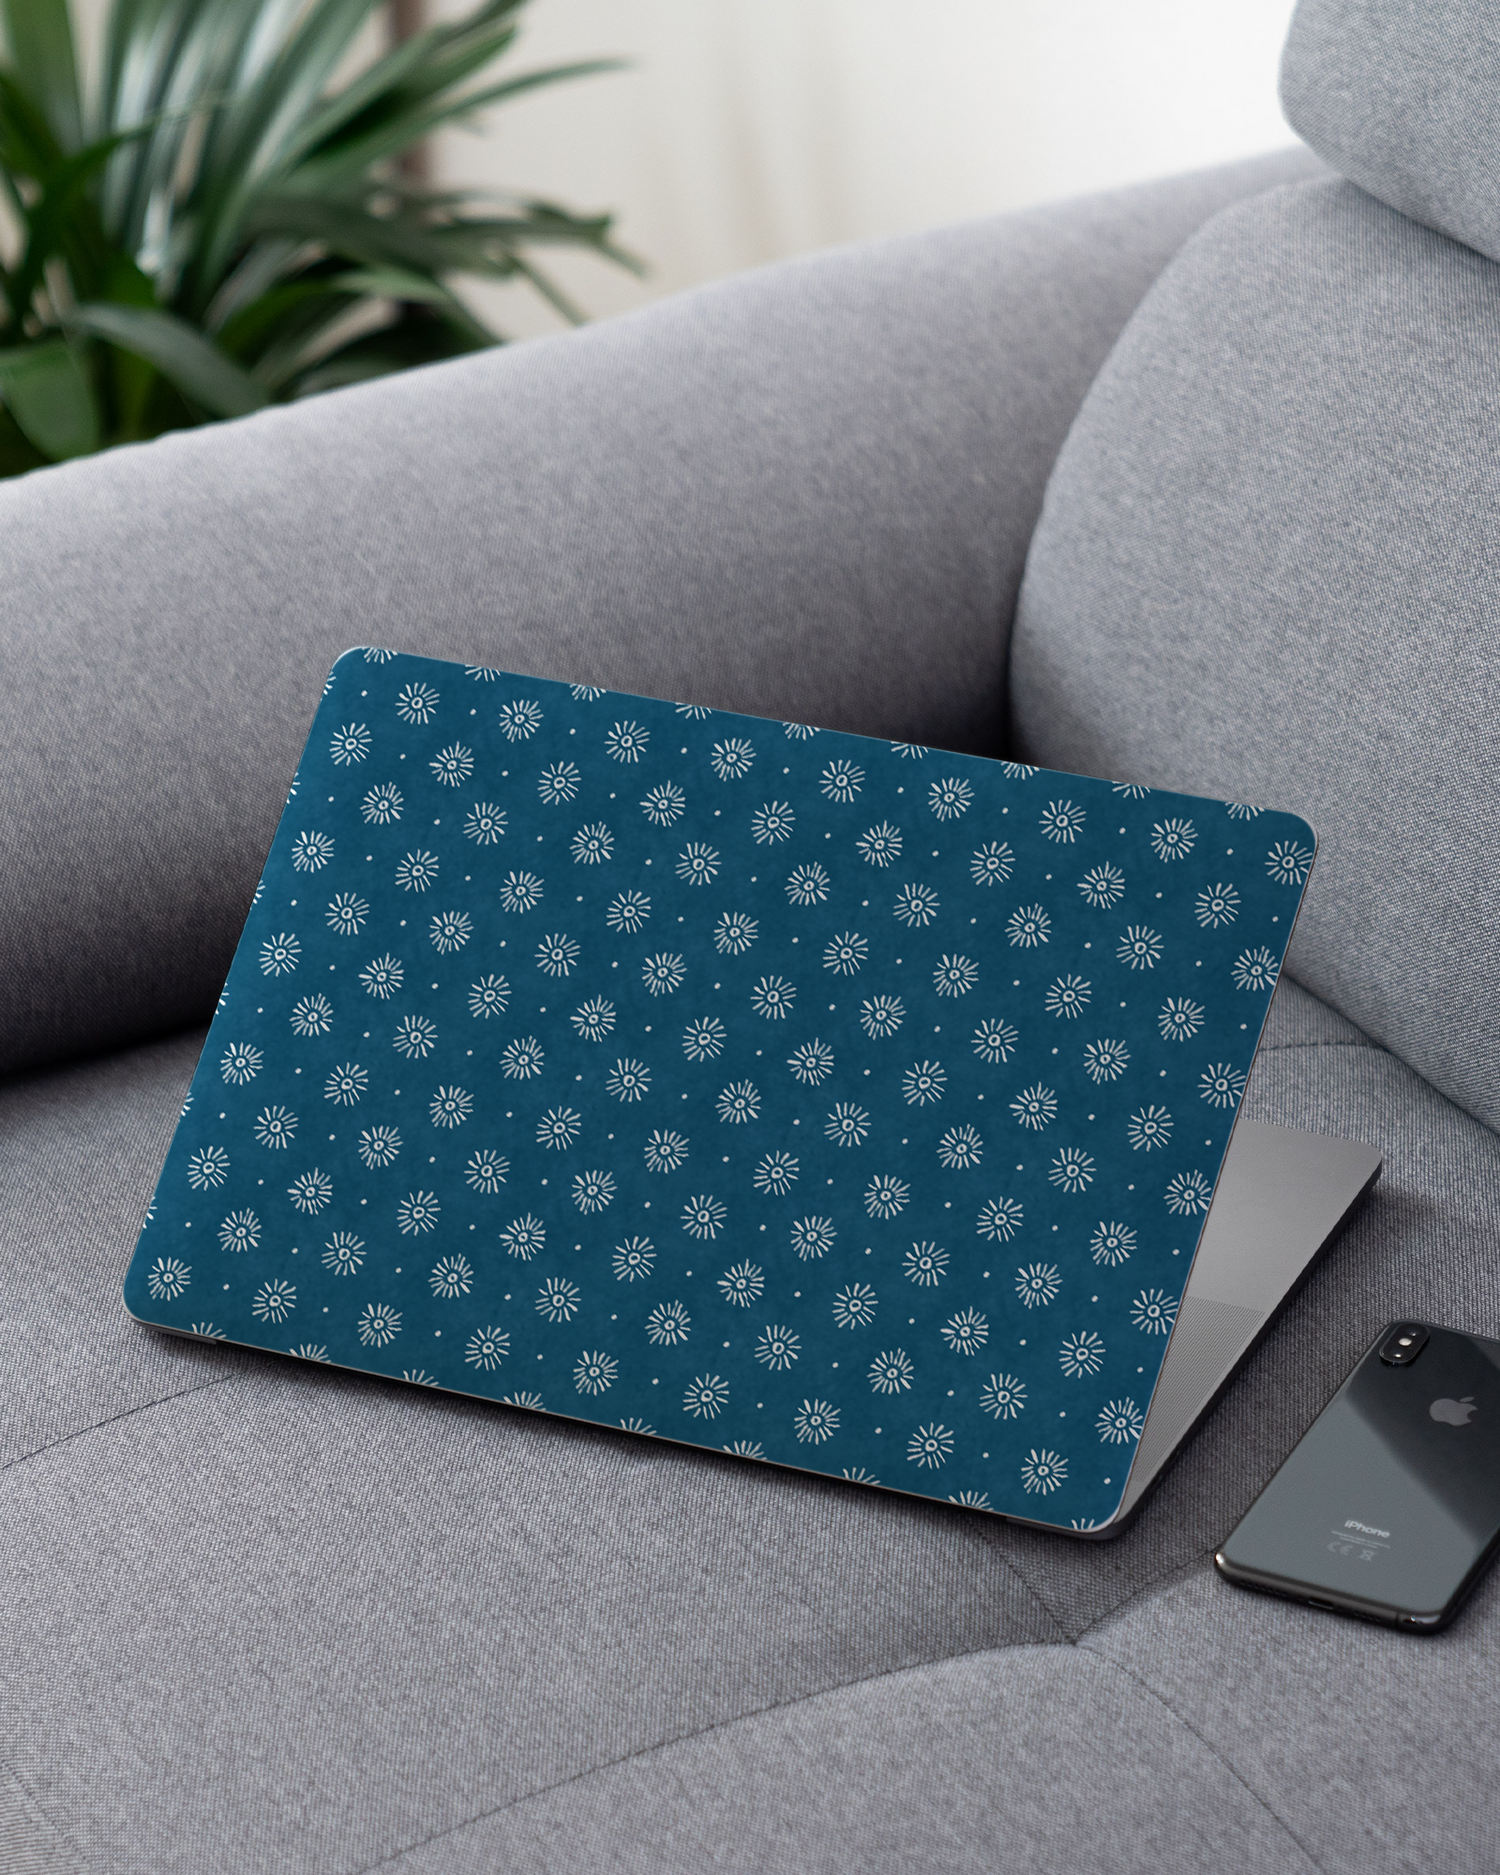 Indigo Sun Pattern Laptop Skin for 13 inch Apple MacBooks on a couch